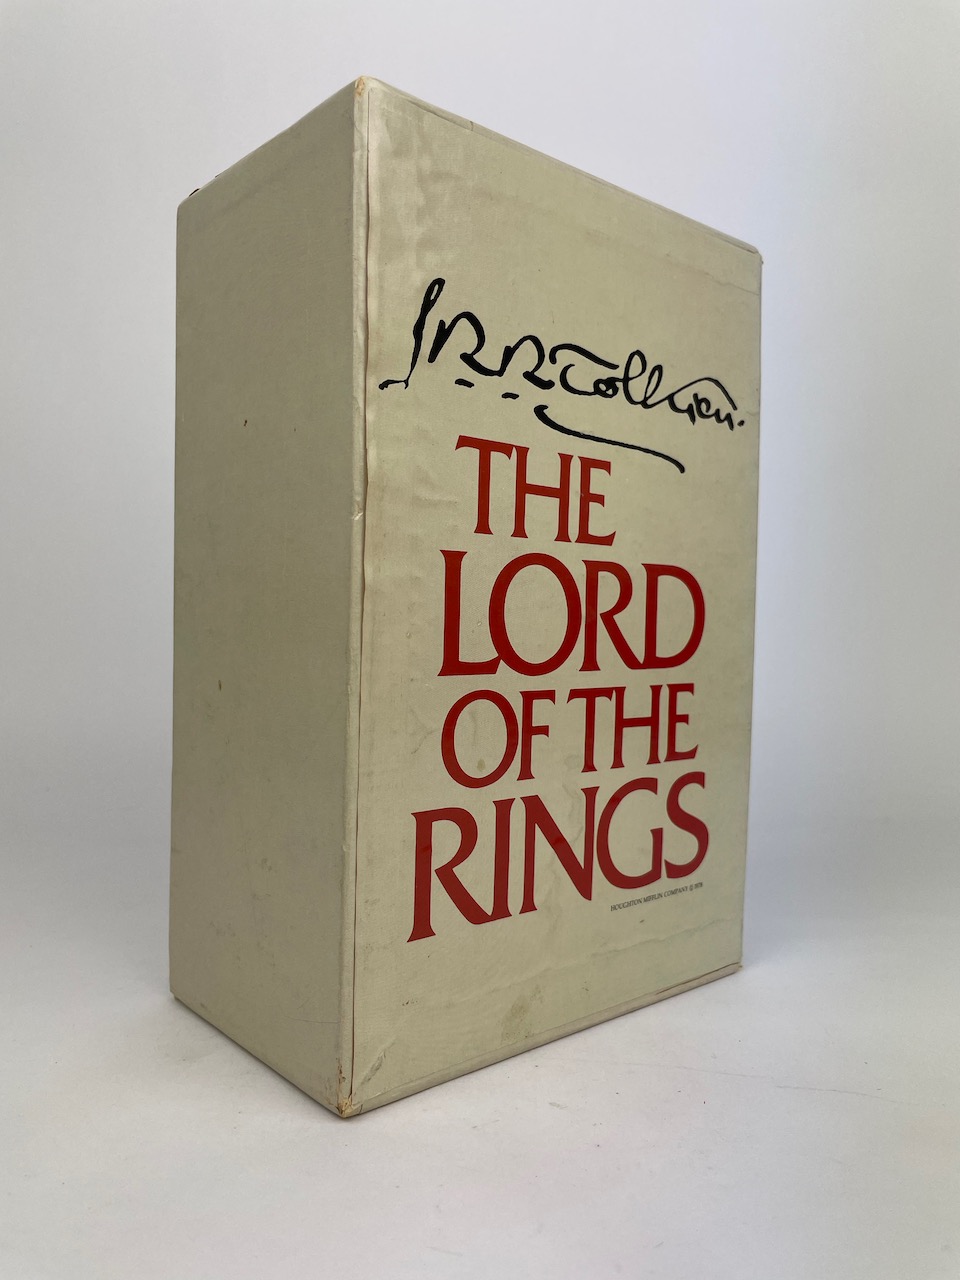 The Lord of the Rings JRR Tolkien Signature set from 1978, by Houghton Mifflin 7